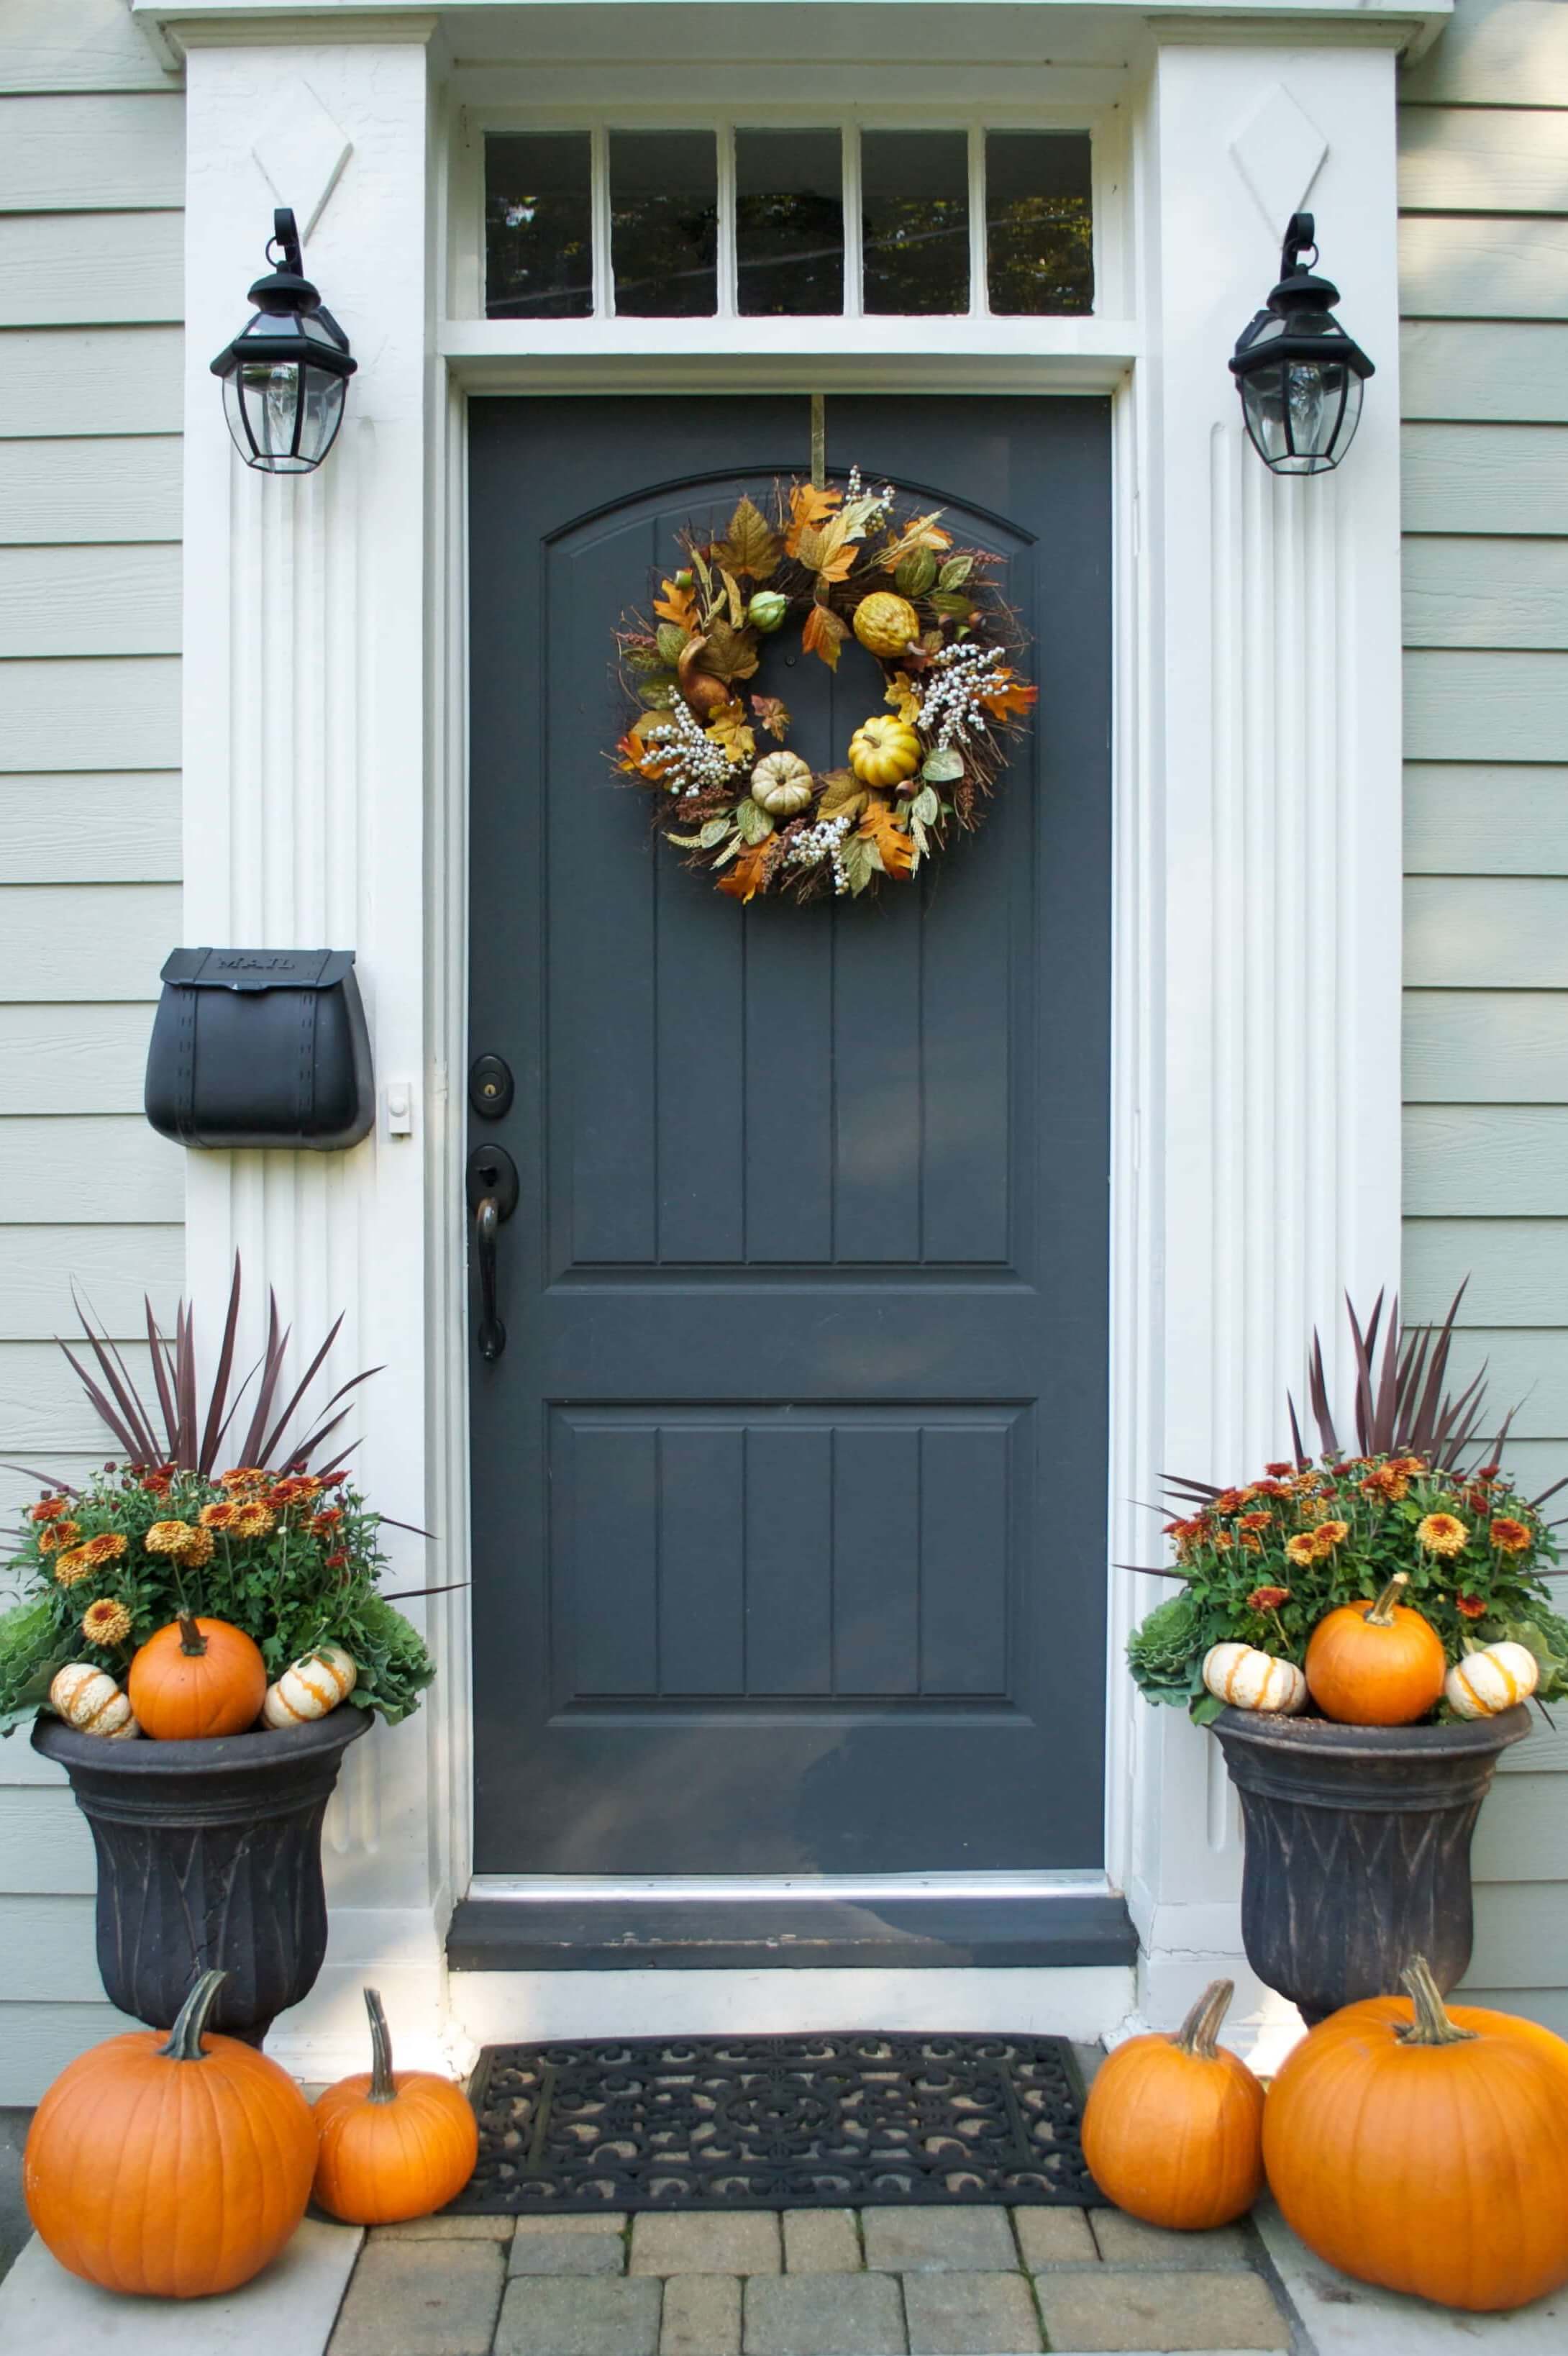 chic fall decor ideas - decorate your door 